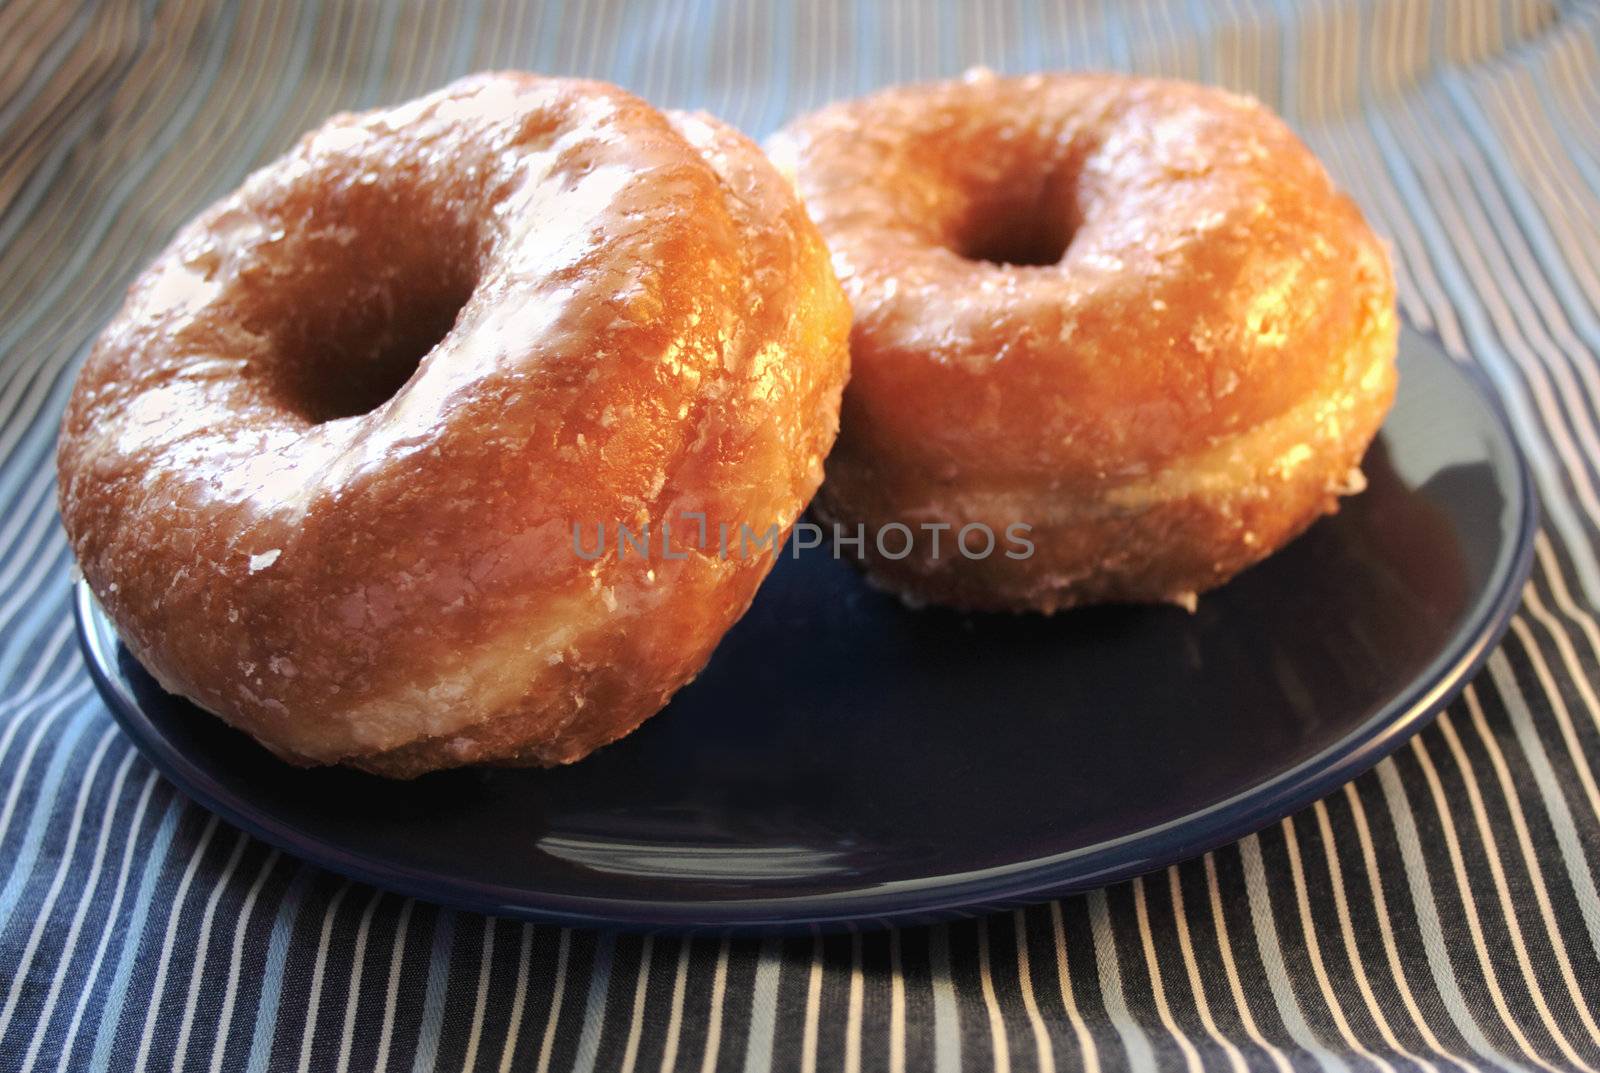 two glazed yeast doughnuts on a blue plate on a striped cloth